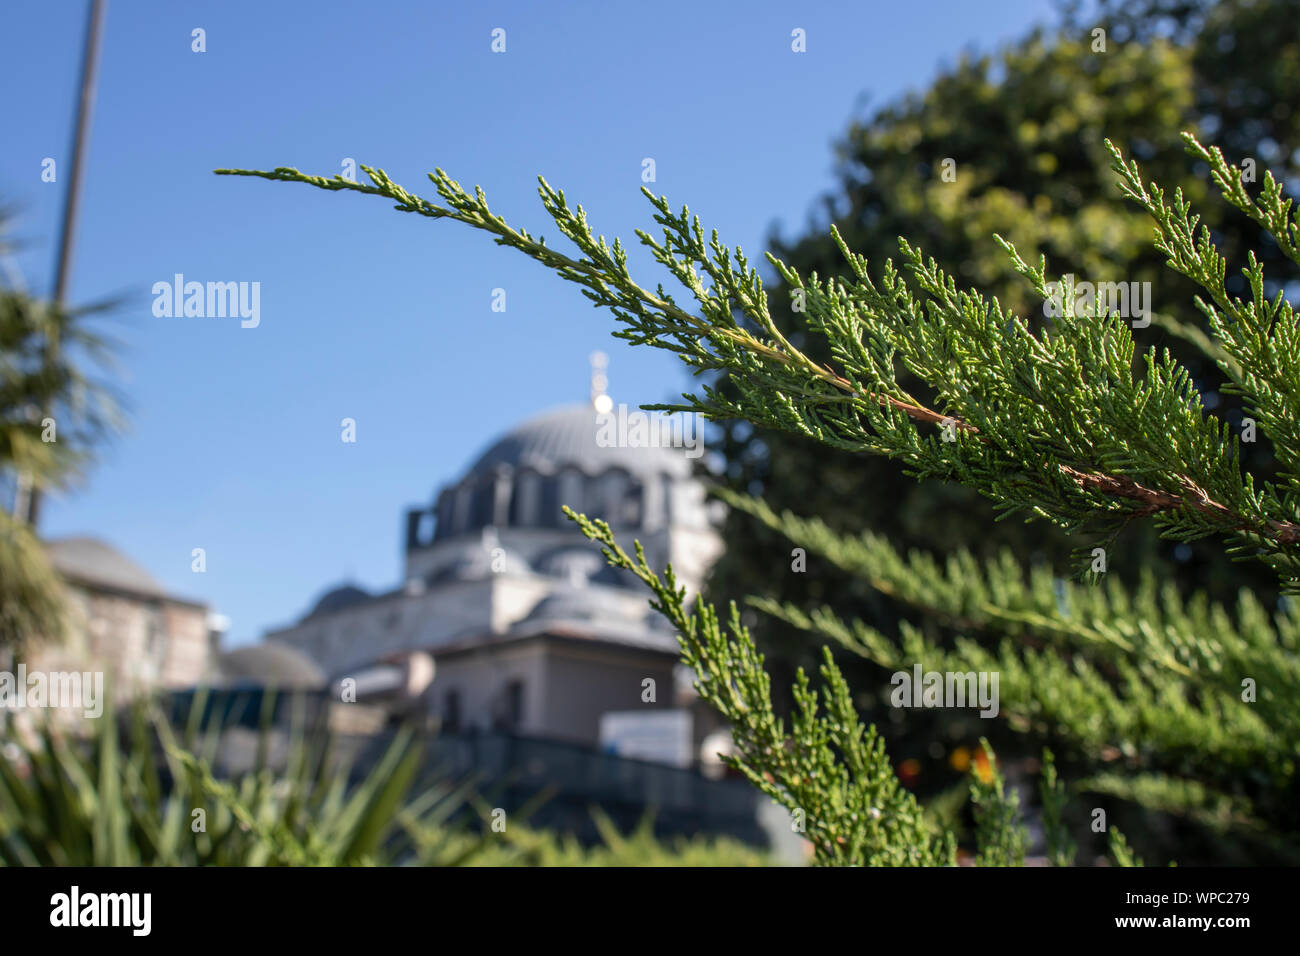 Close-up of branches of Western red cedar tree. Picture of blurred mosque in background. Stock Photo